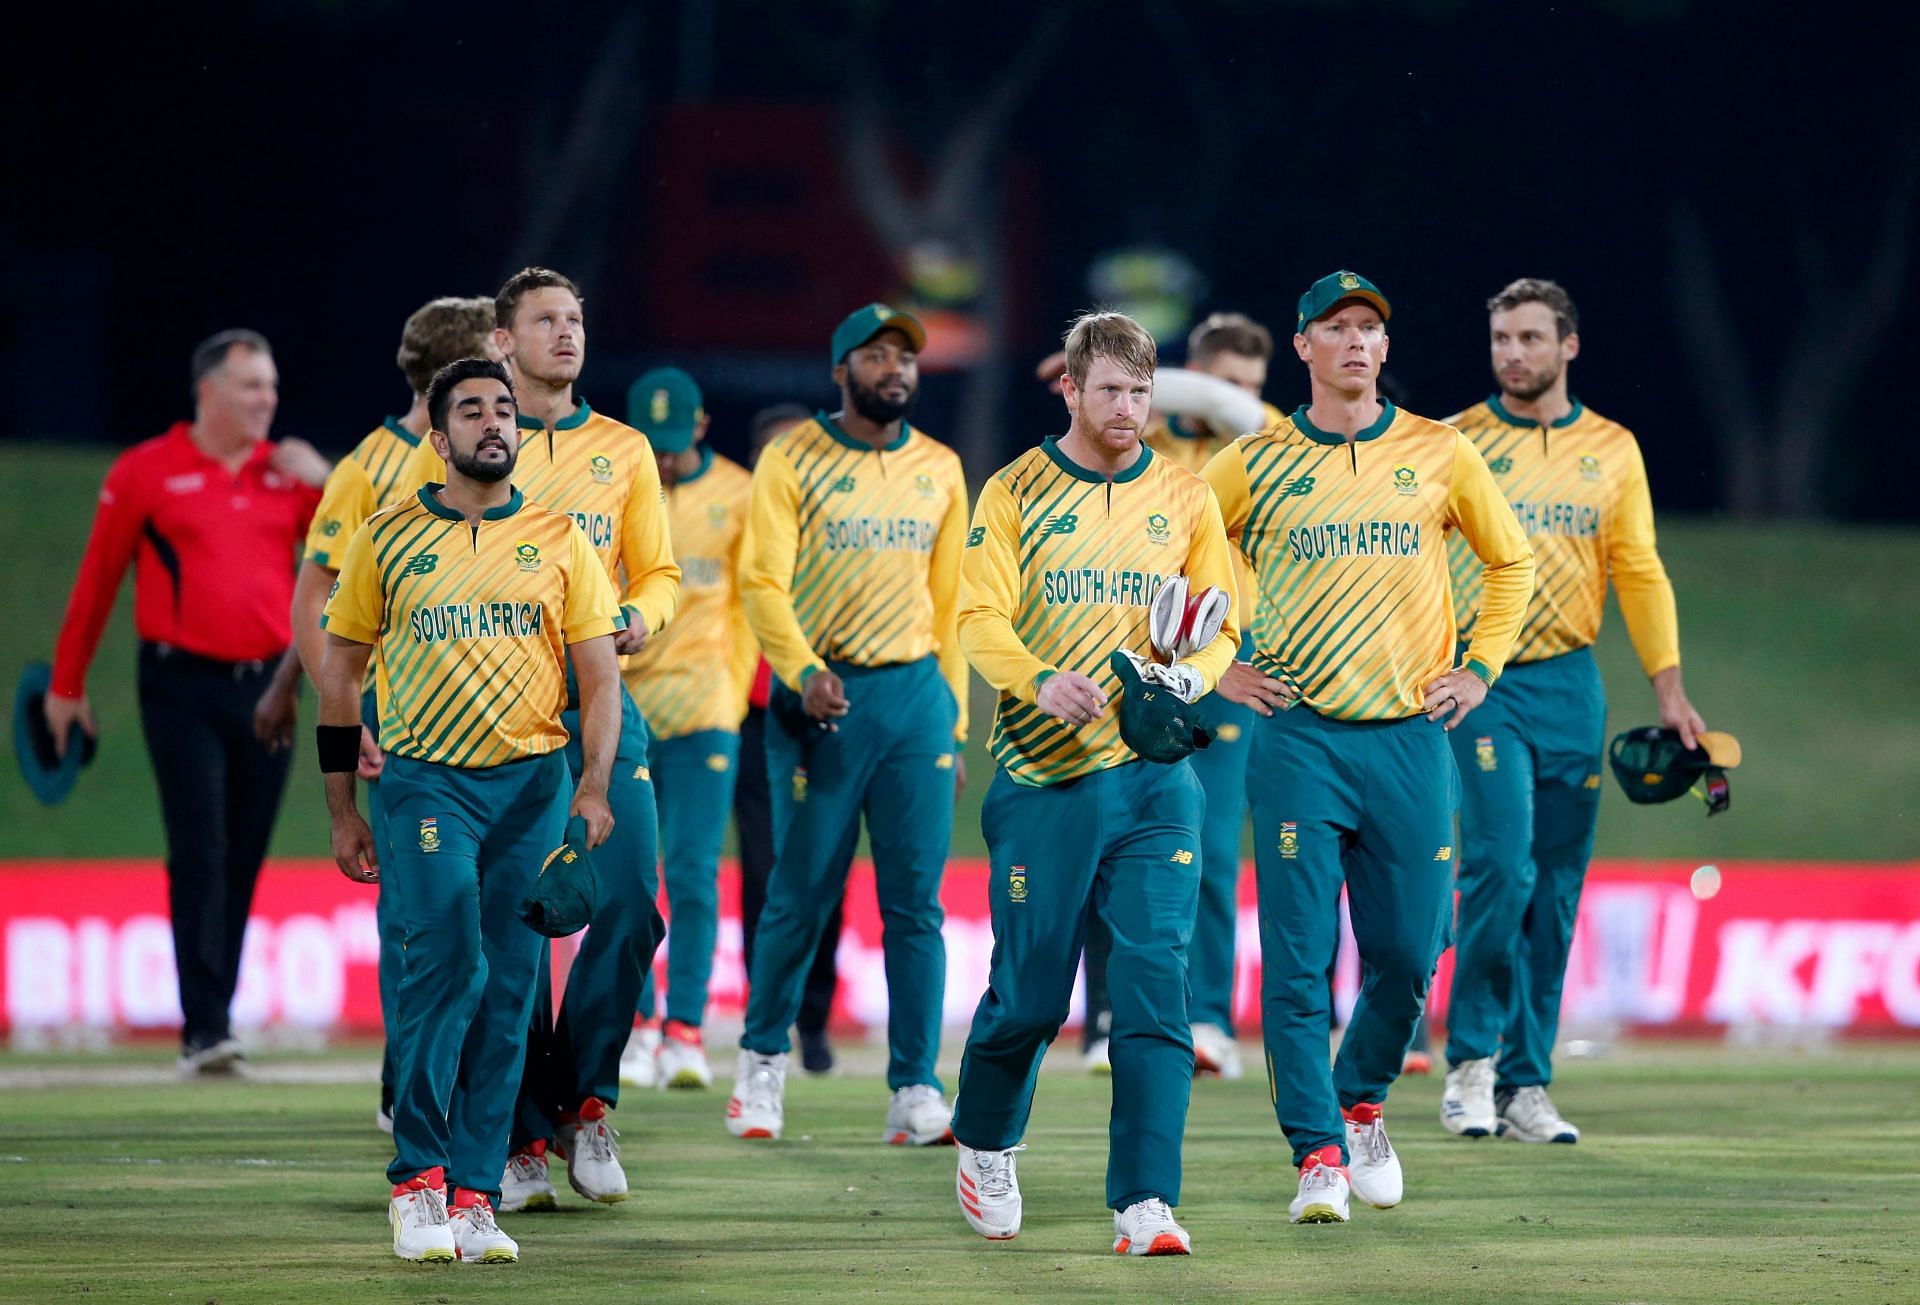 SA beat AFGH by 41 runs in the opening warm-up game [Image- AP]